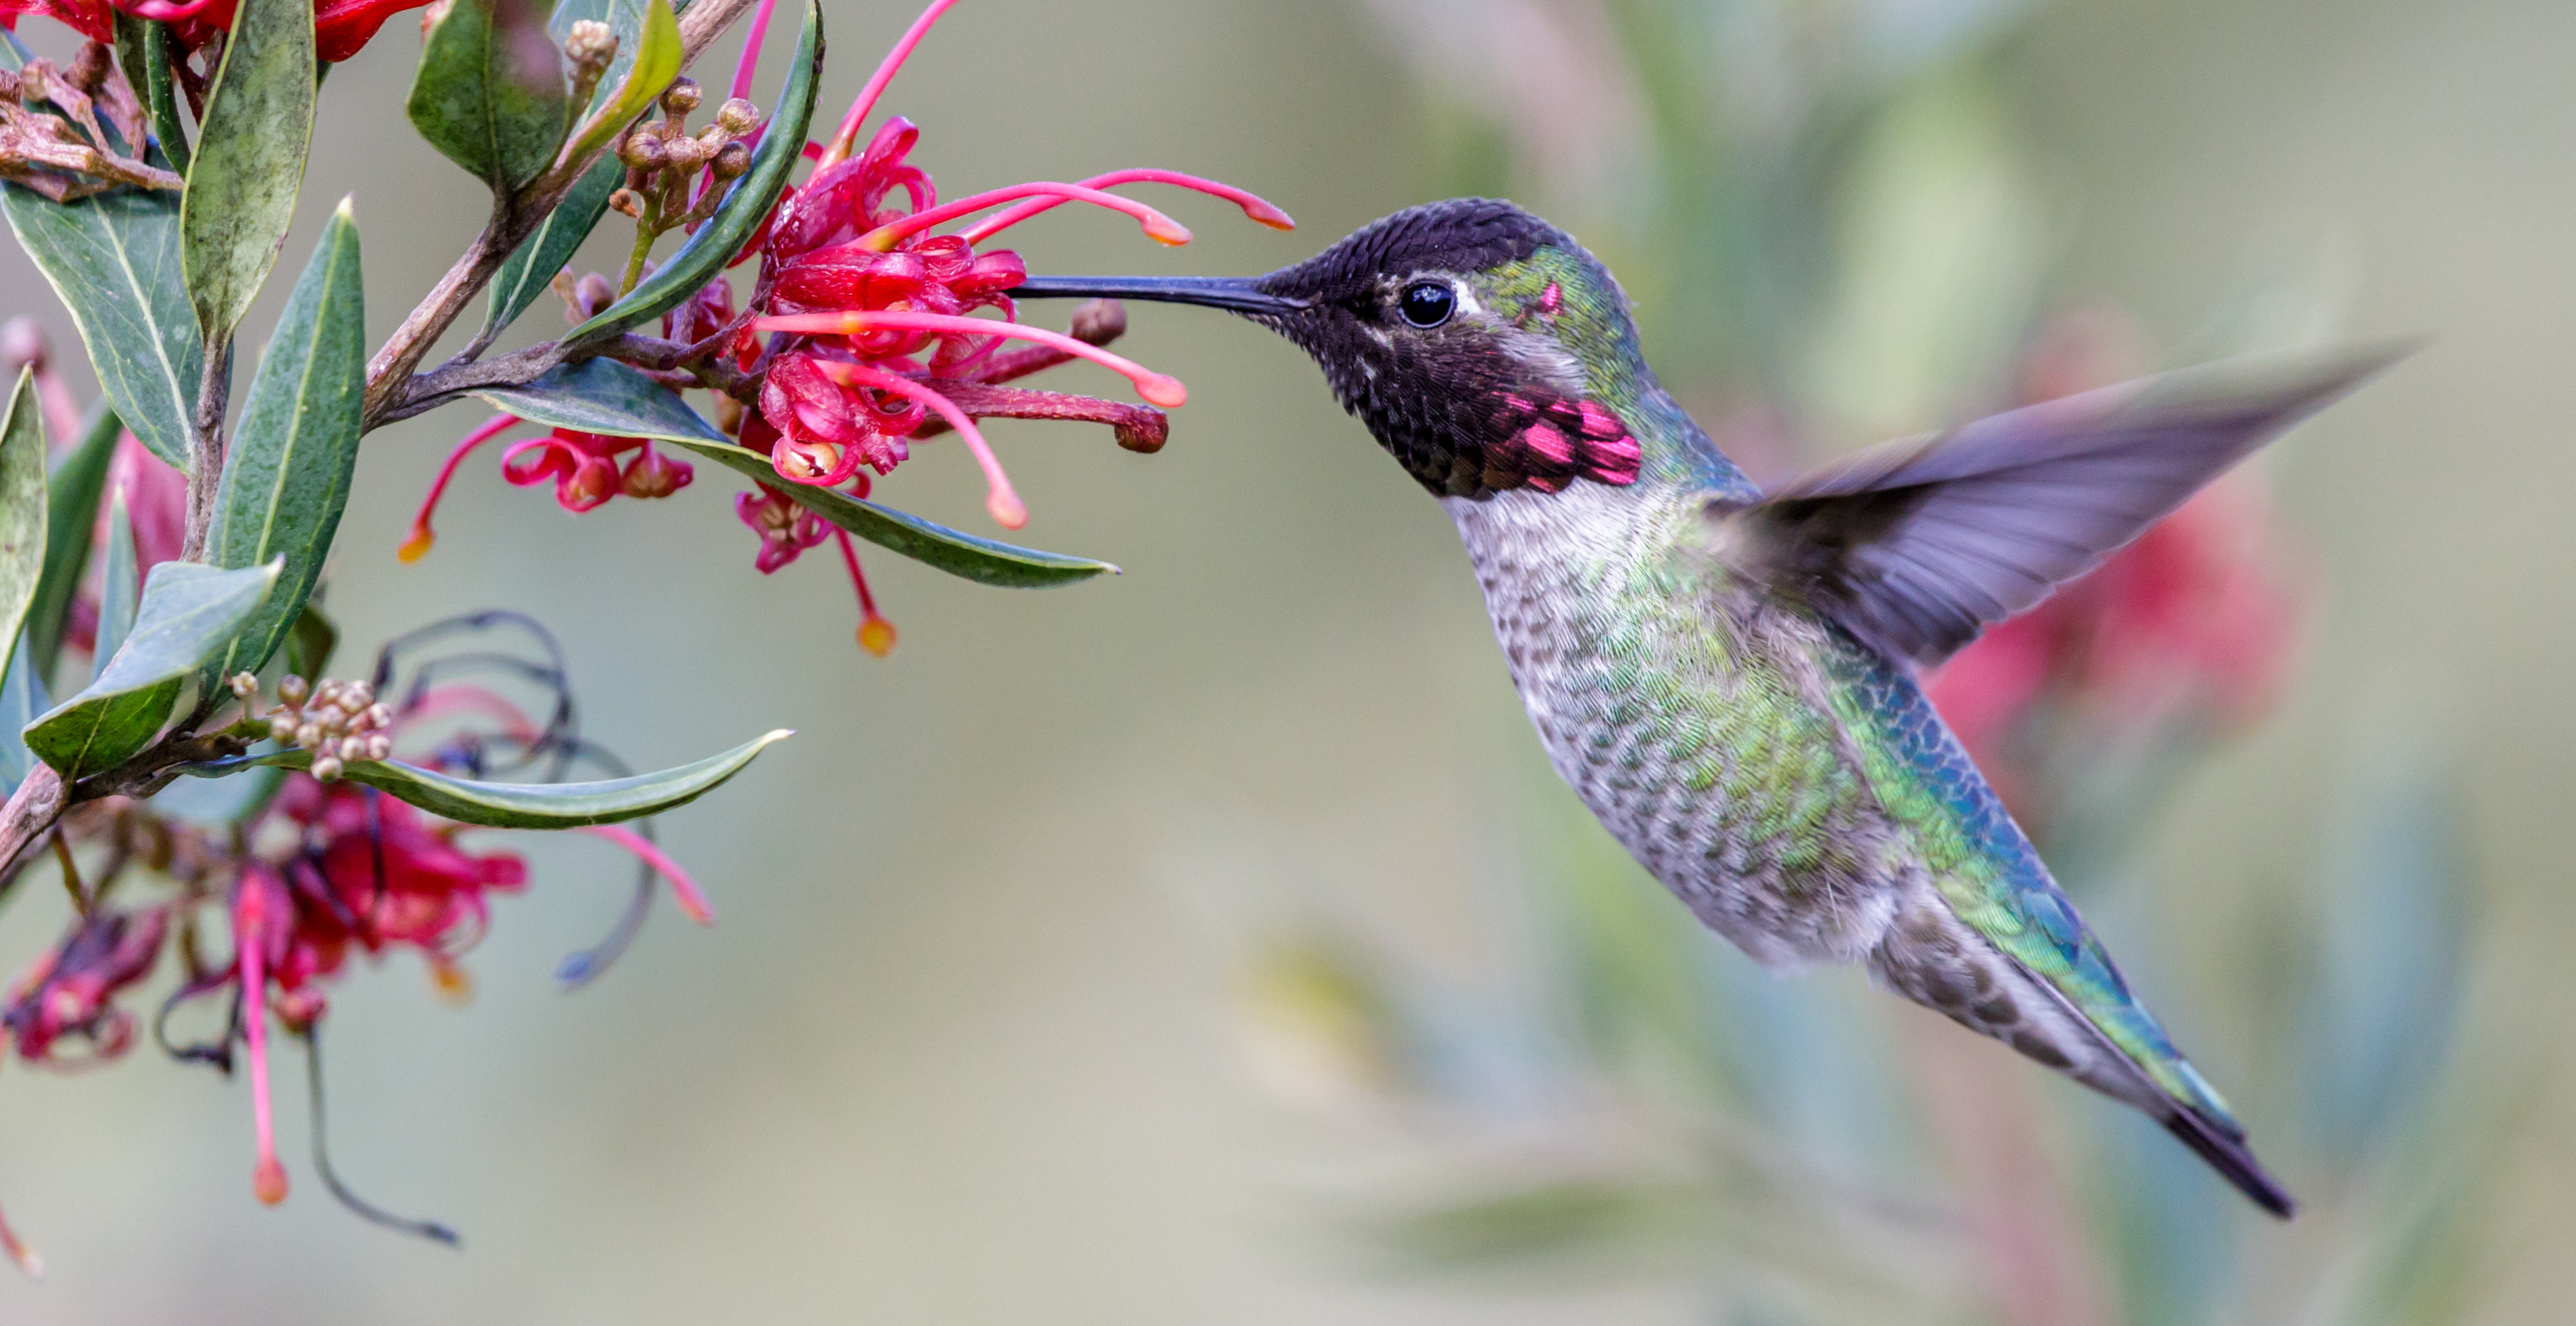 Do Hummingbirds Return to the Same Place Every Year?